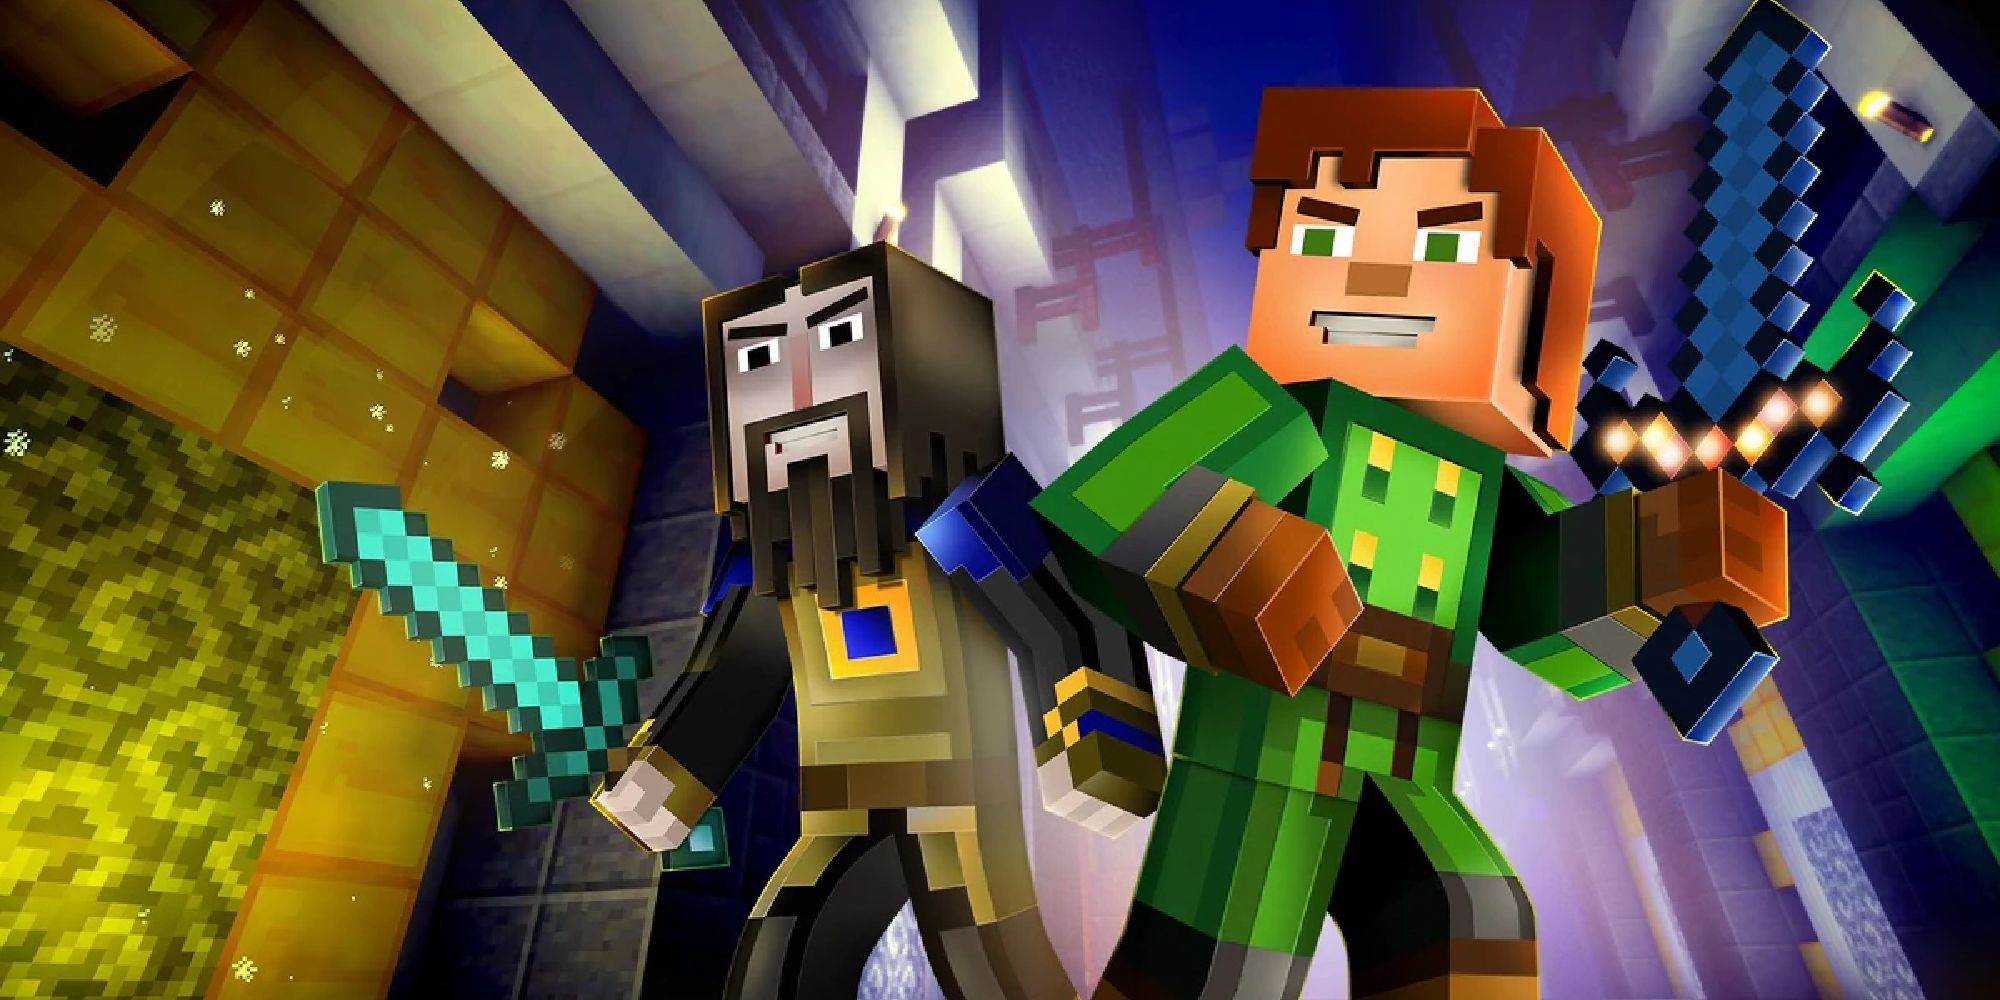 Two minecraft characters ready to jump into action.